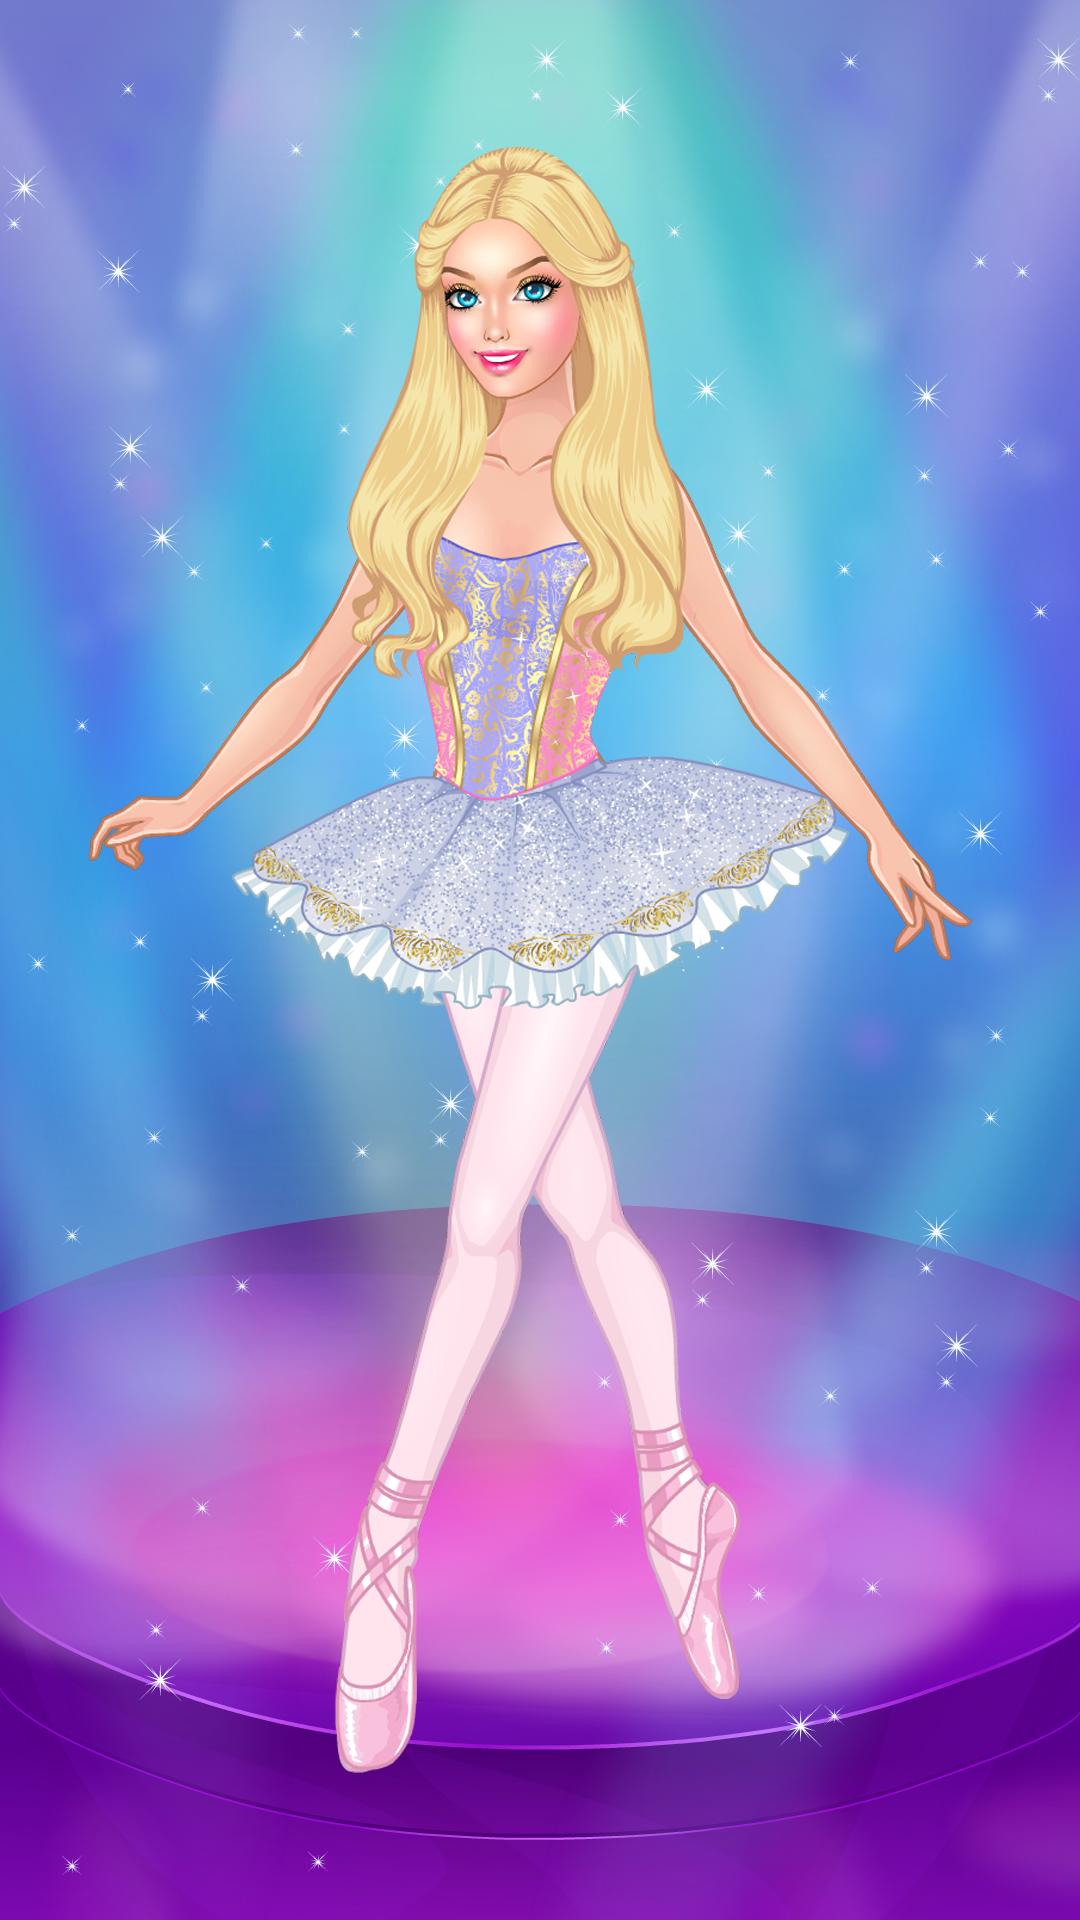 Ballerina Dress Up Games for Android - APK Download